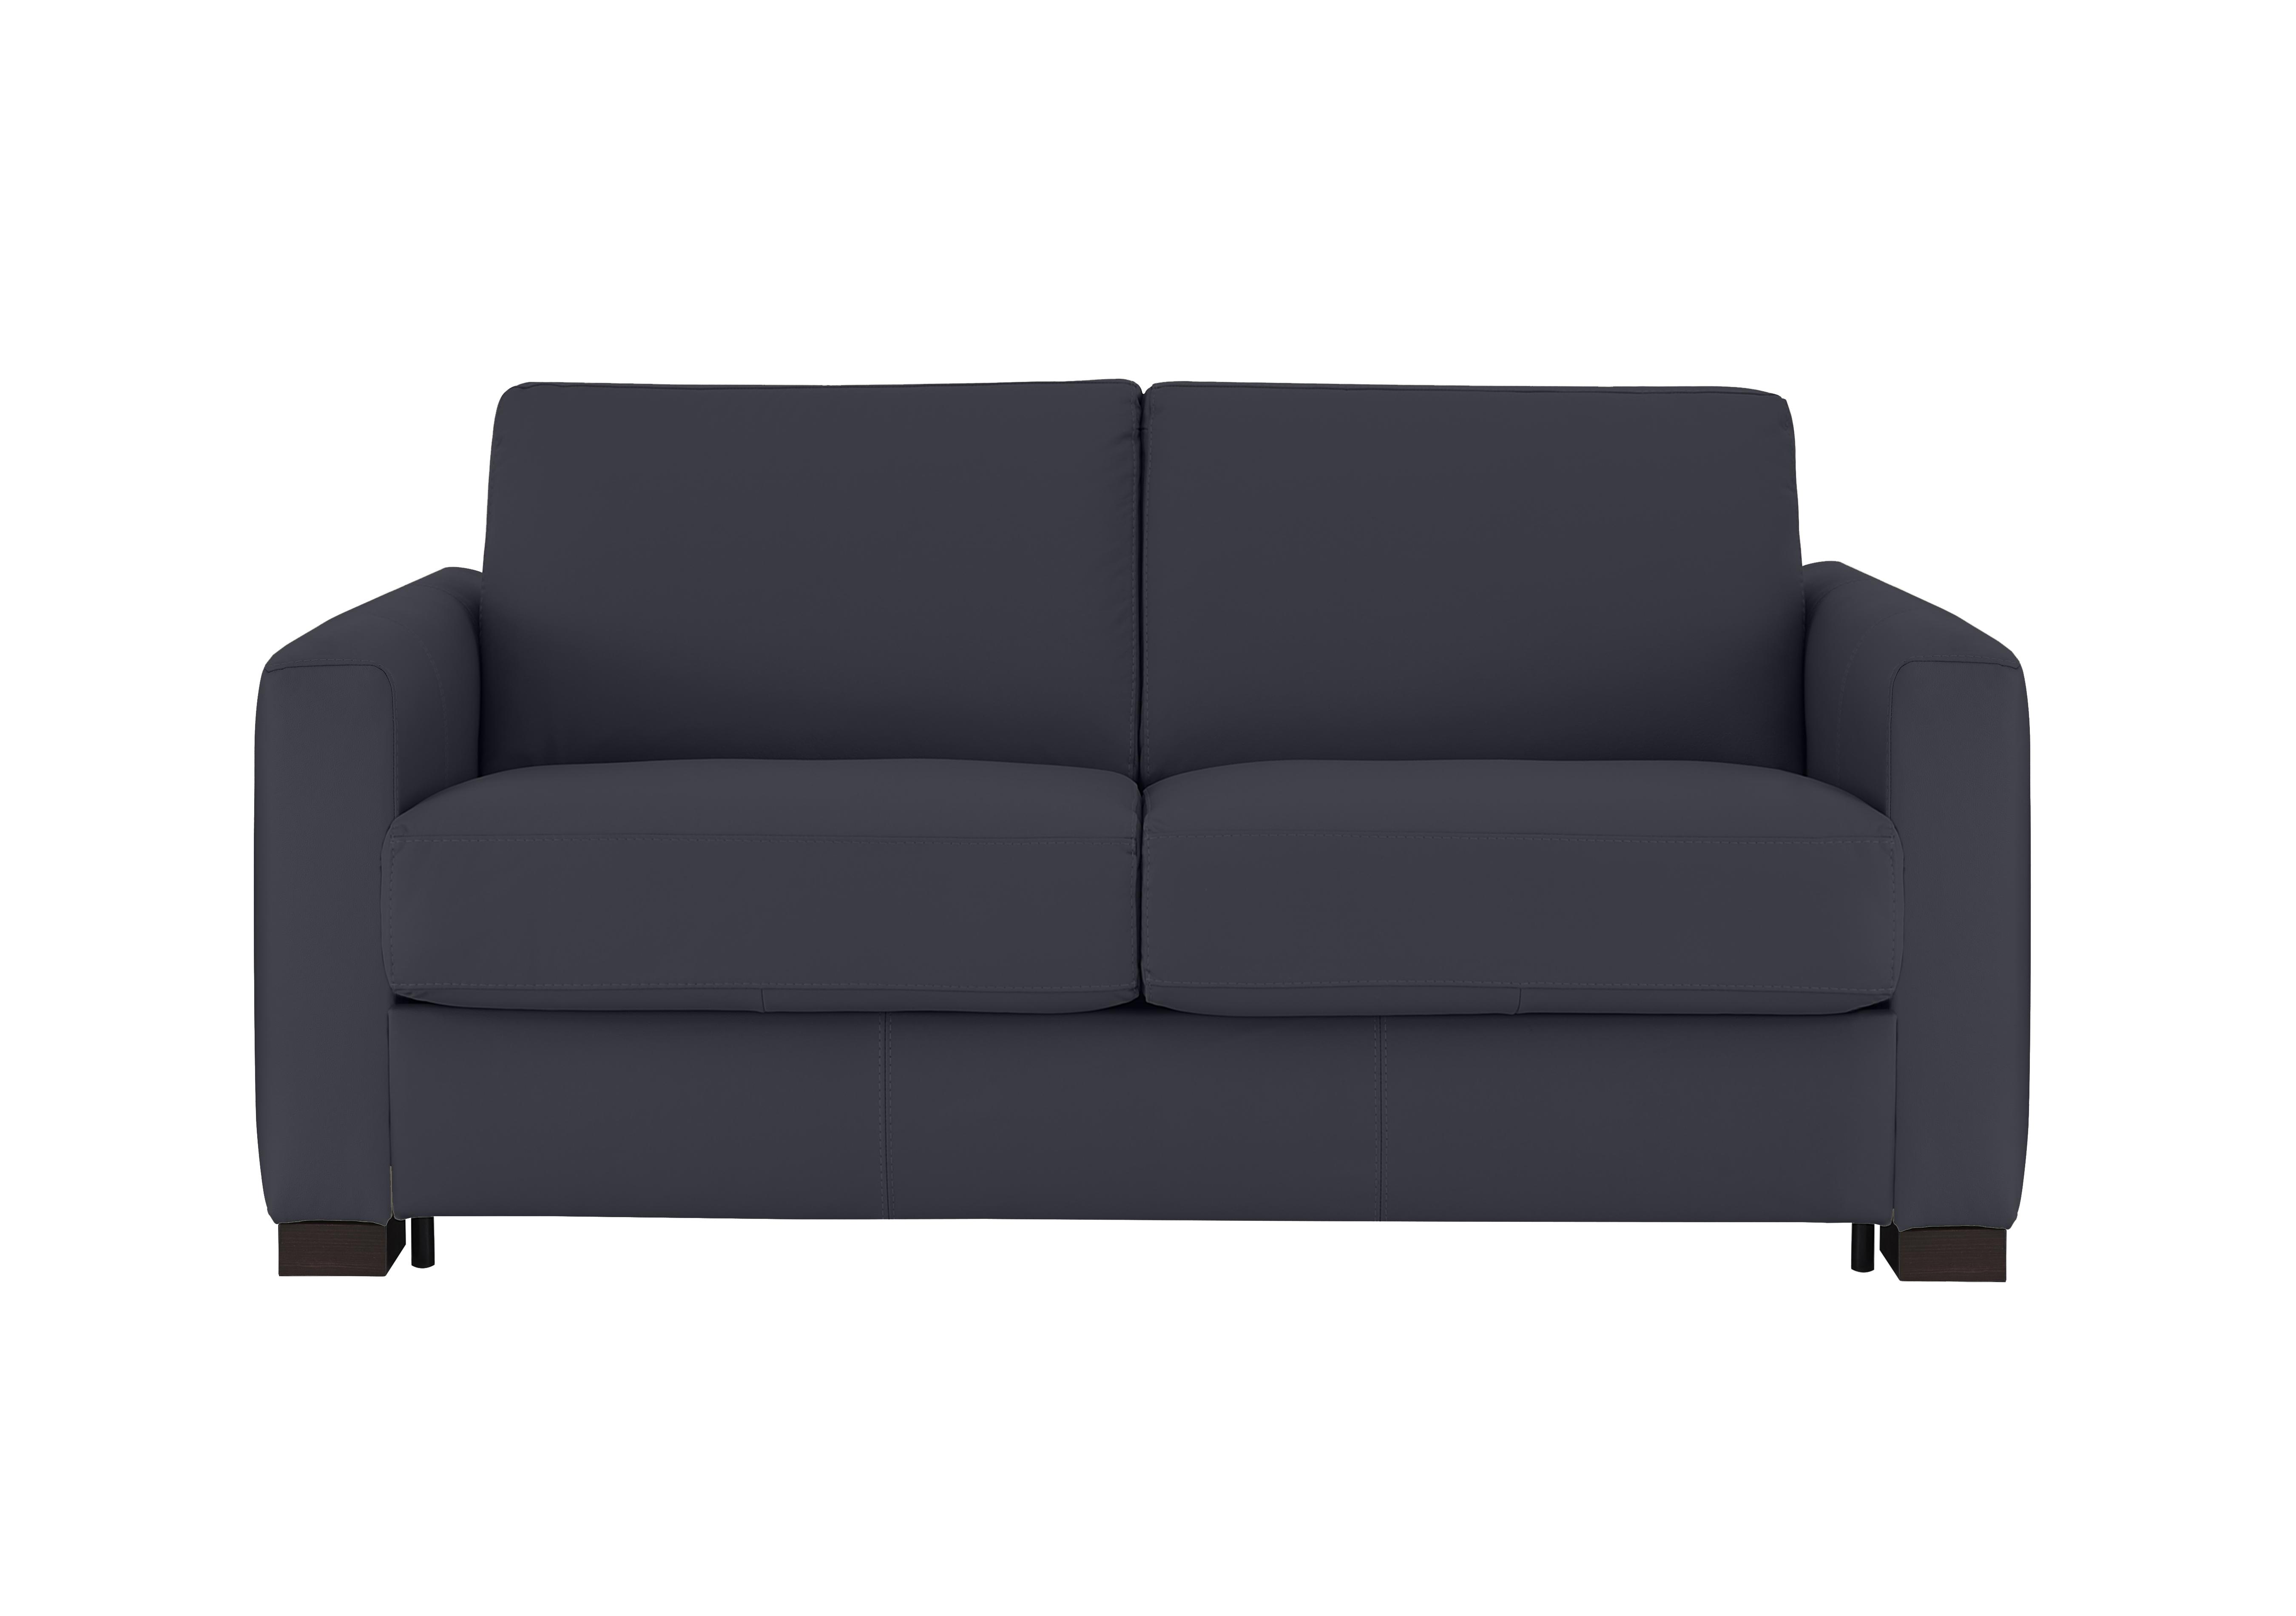 Alcova 2 Seater Leather Sofa Bed with Box Arms in Torello Blu 81 on Furniture Village